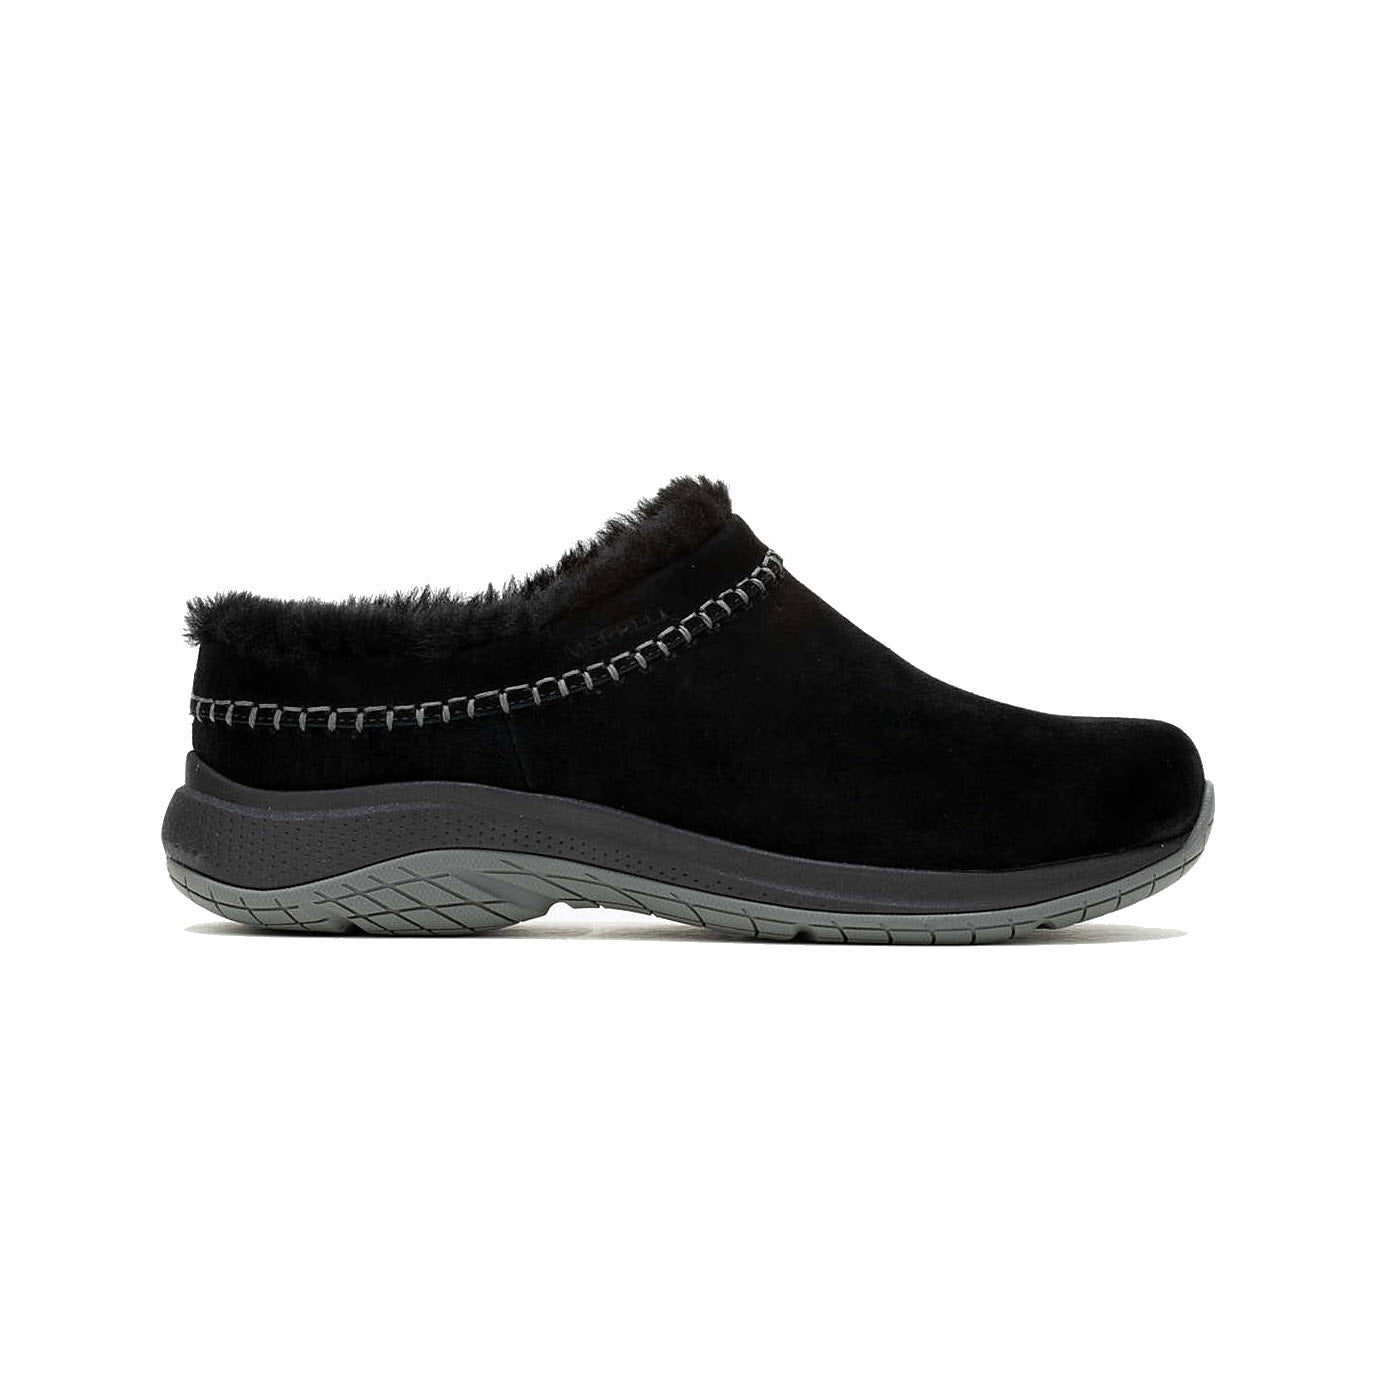 Side view of a black suede Merrell Encore Ice clog with sheepskin lining and gray outsole, designed for winter wear.